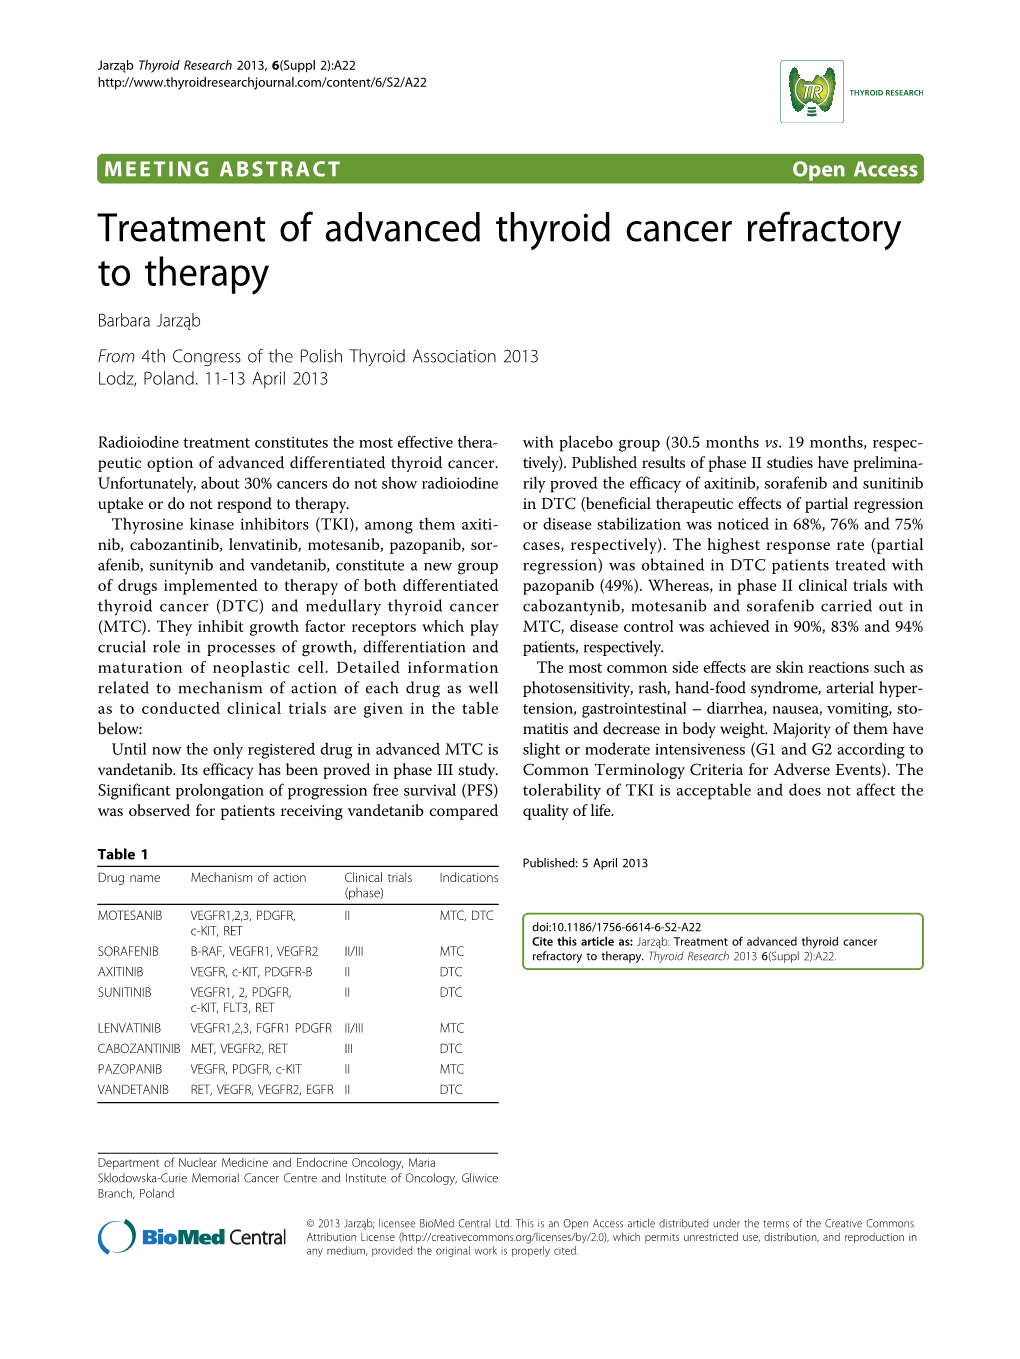 Treatment of Advanced Thyroid Cancer Refractory to Therapy